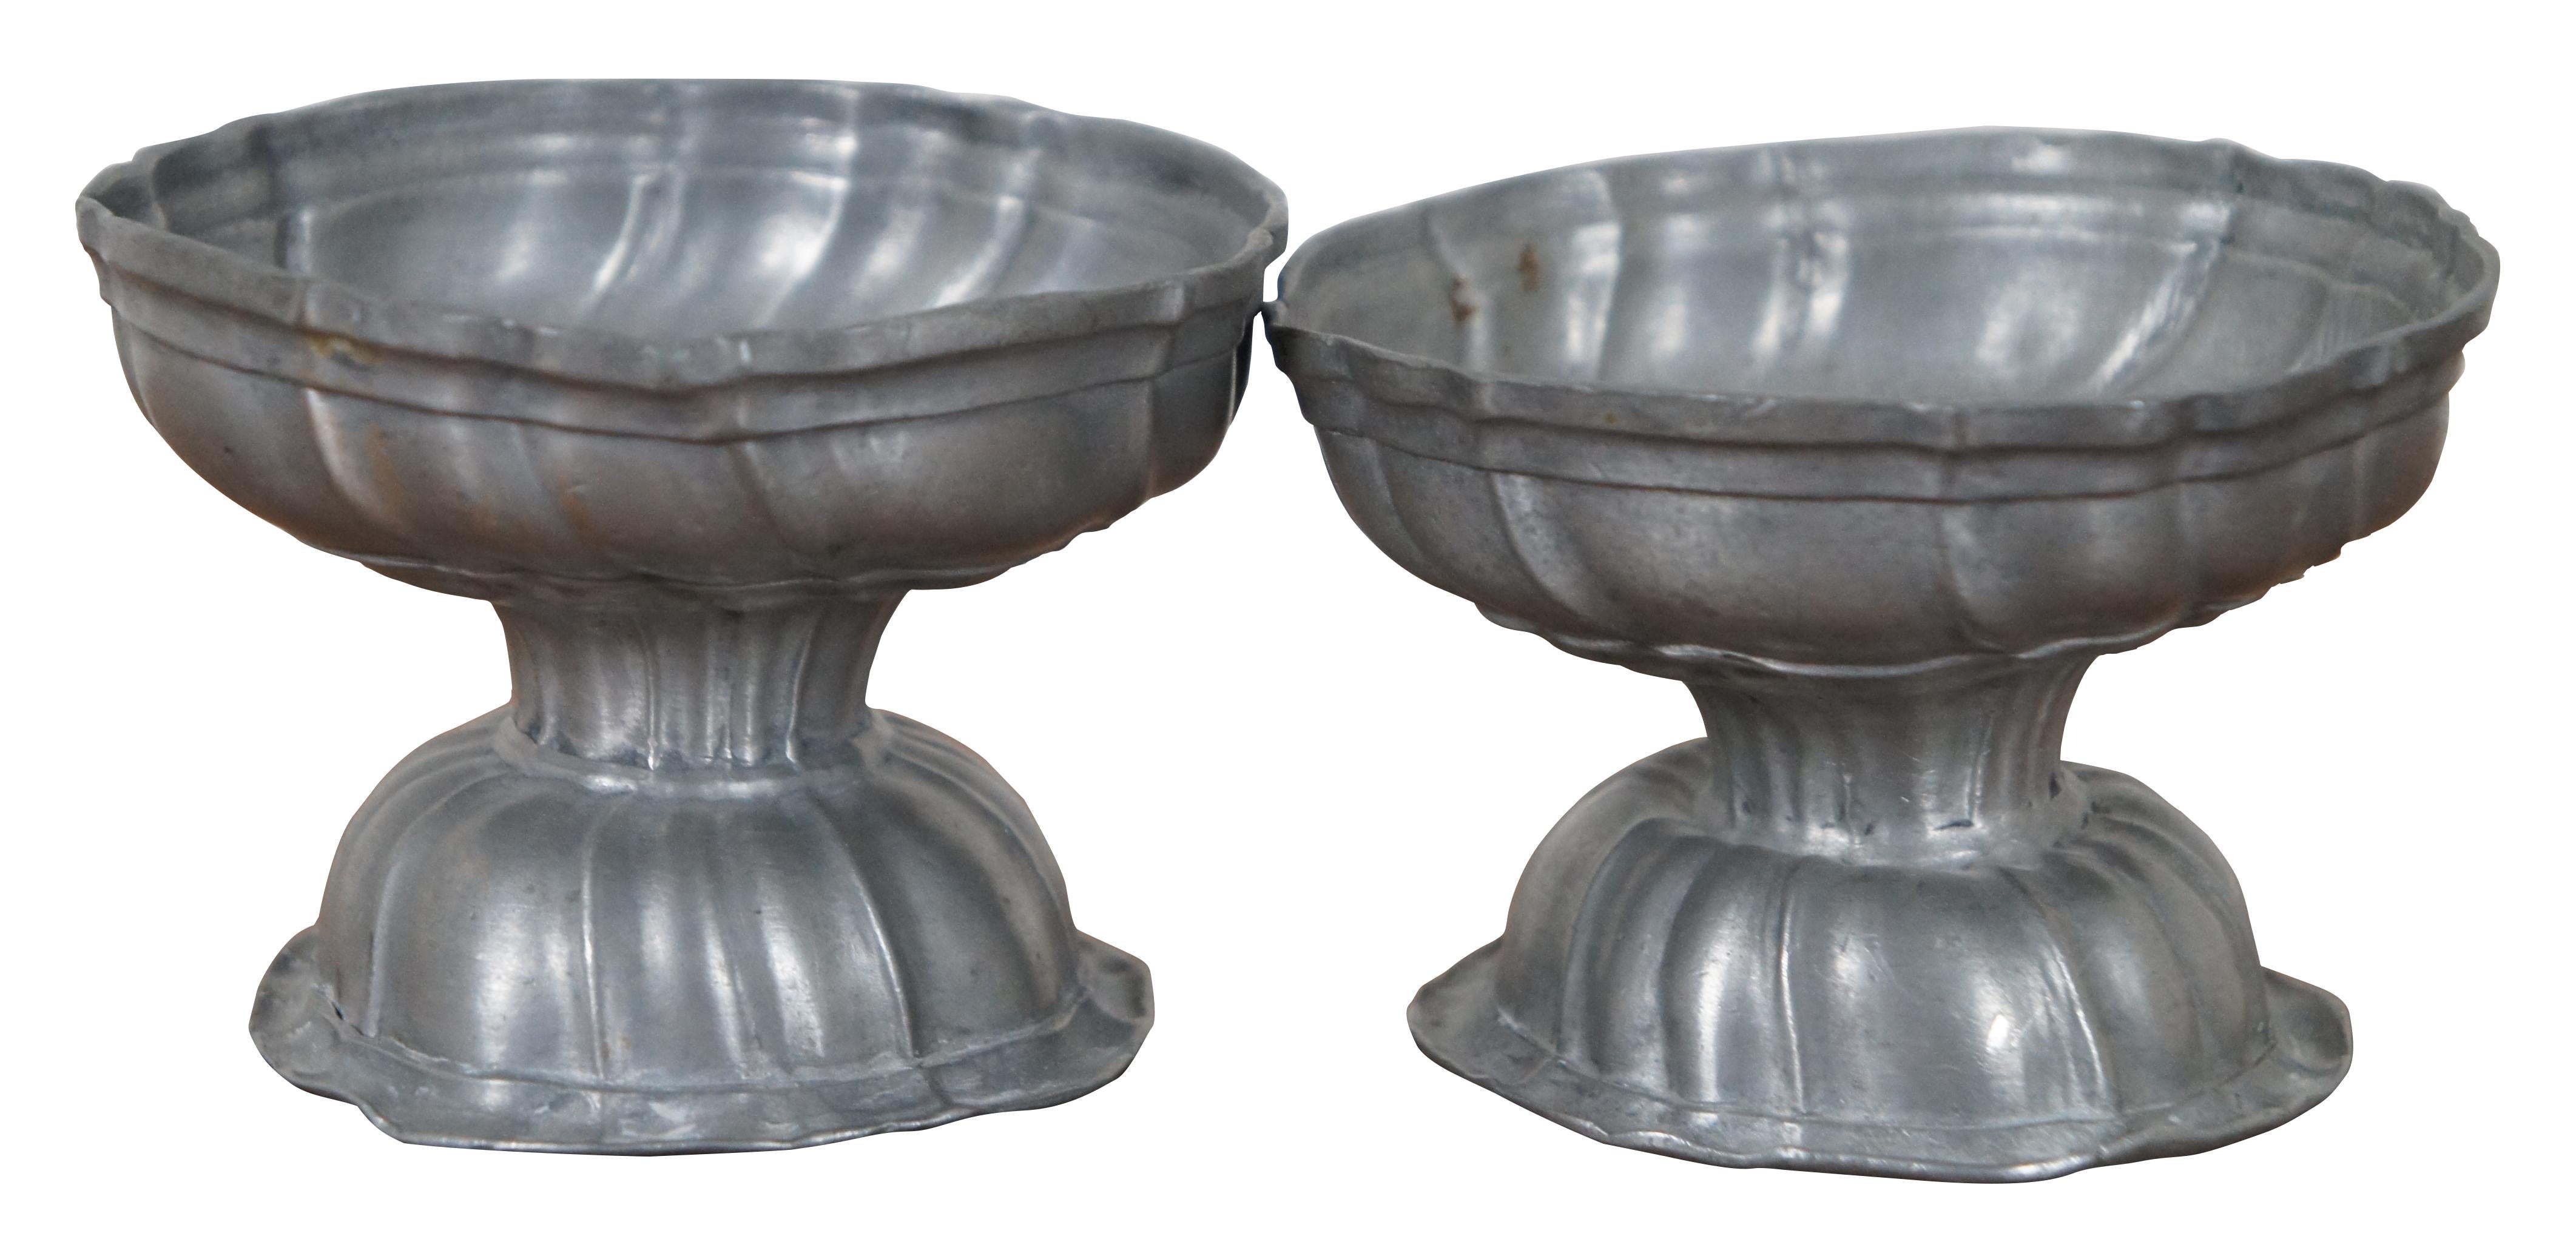 Pair of rare antique 18th century pewter salt cellars / bowls / pedestal dishes or footed cups with unique scalloped and swirled form. Measure: 3